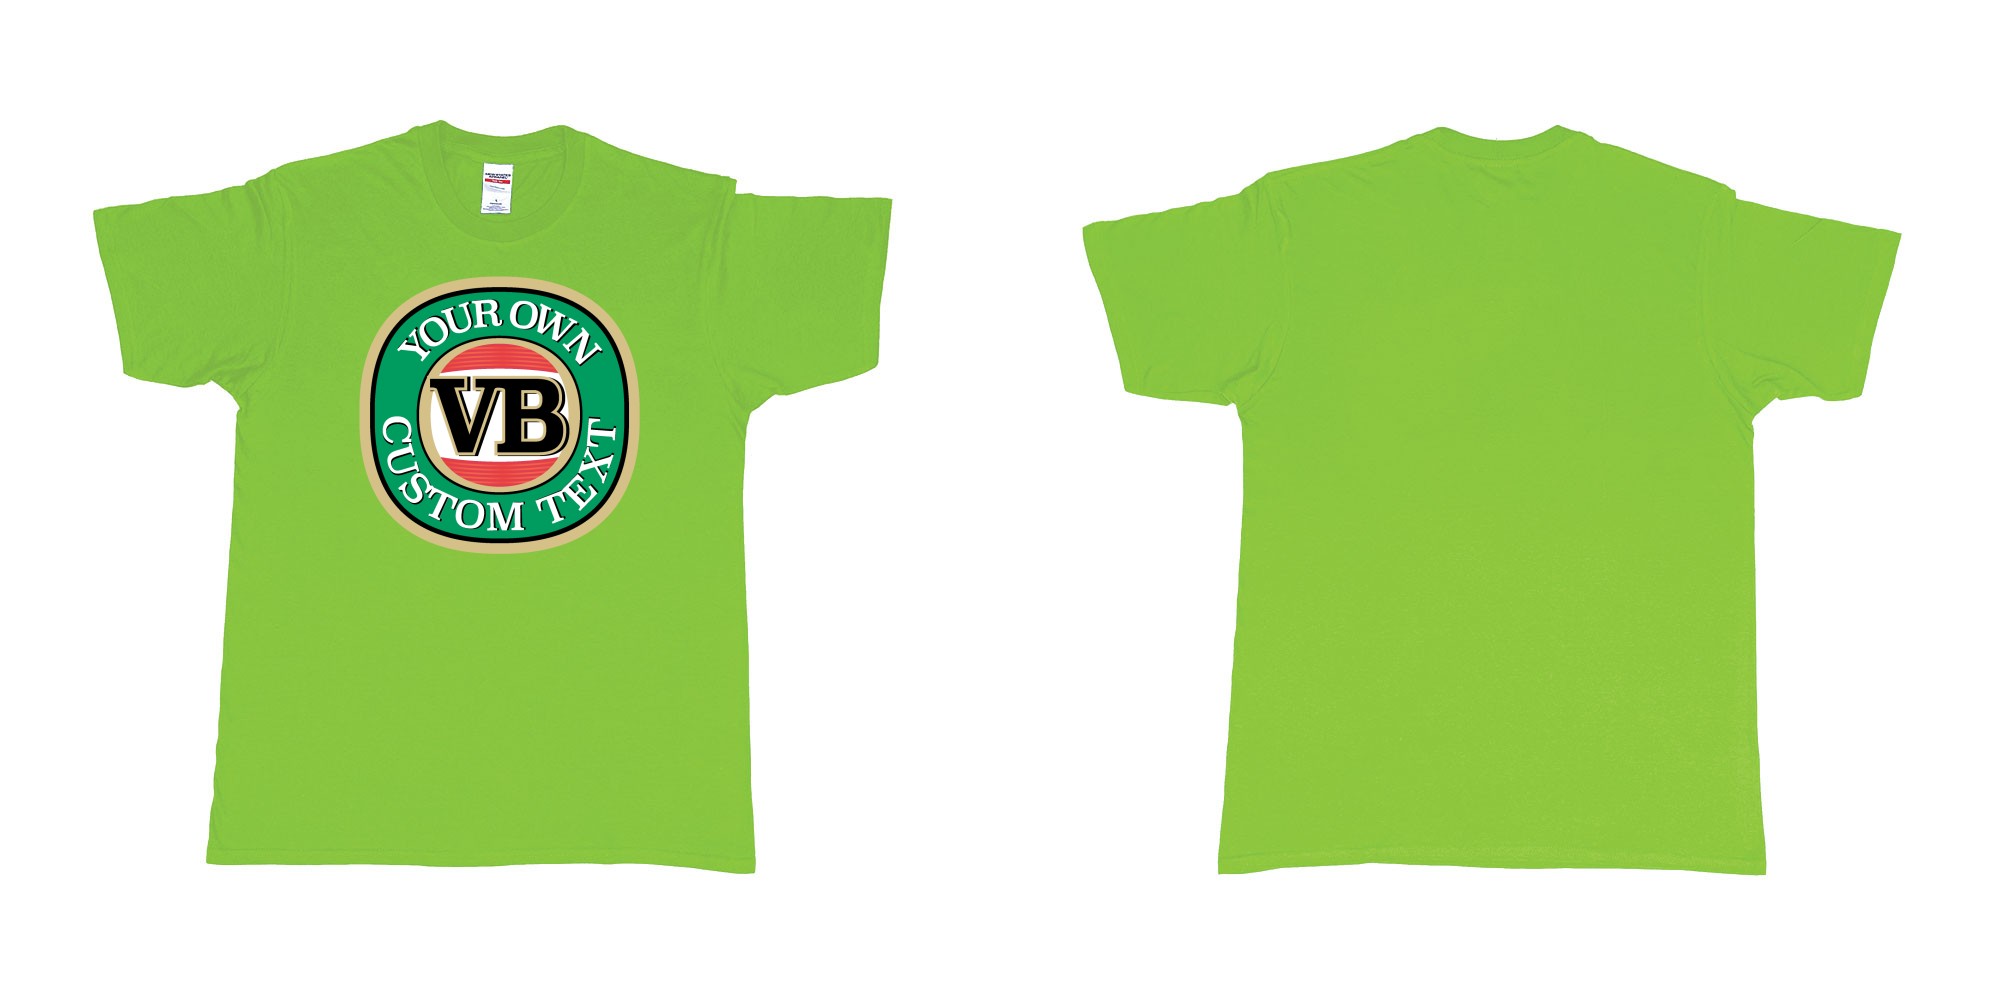 Custom tshirt design vb victoria bitter beer brand logo in fabric color lime choice your own text made in Bali by The Pirate Way